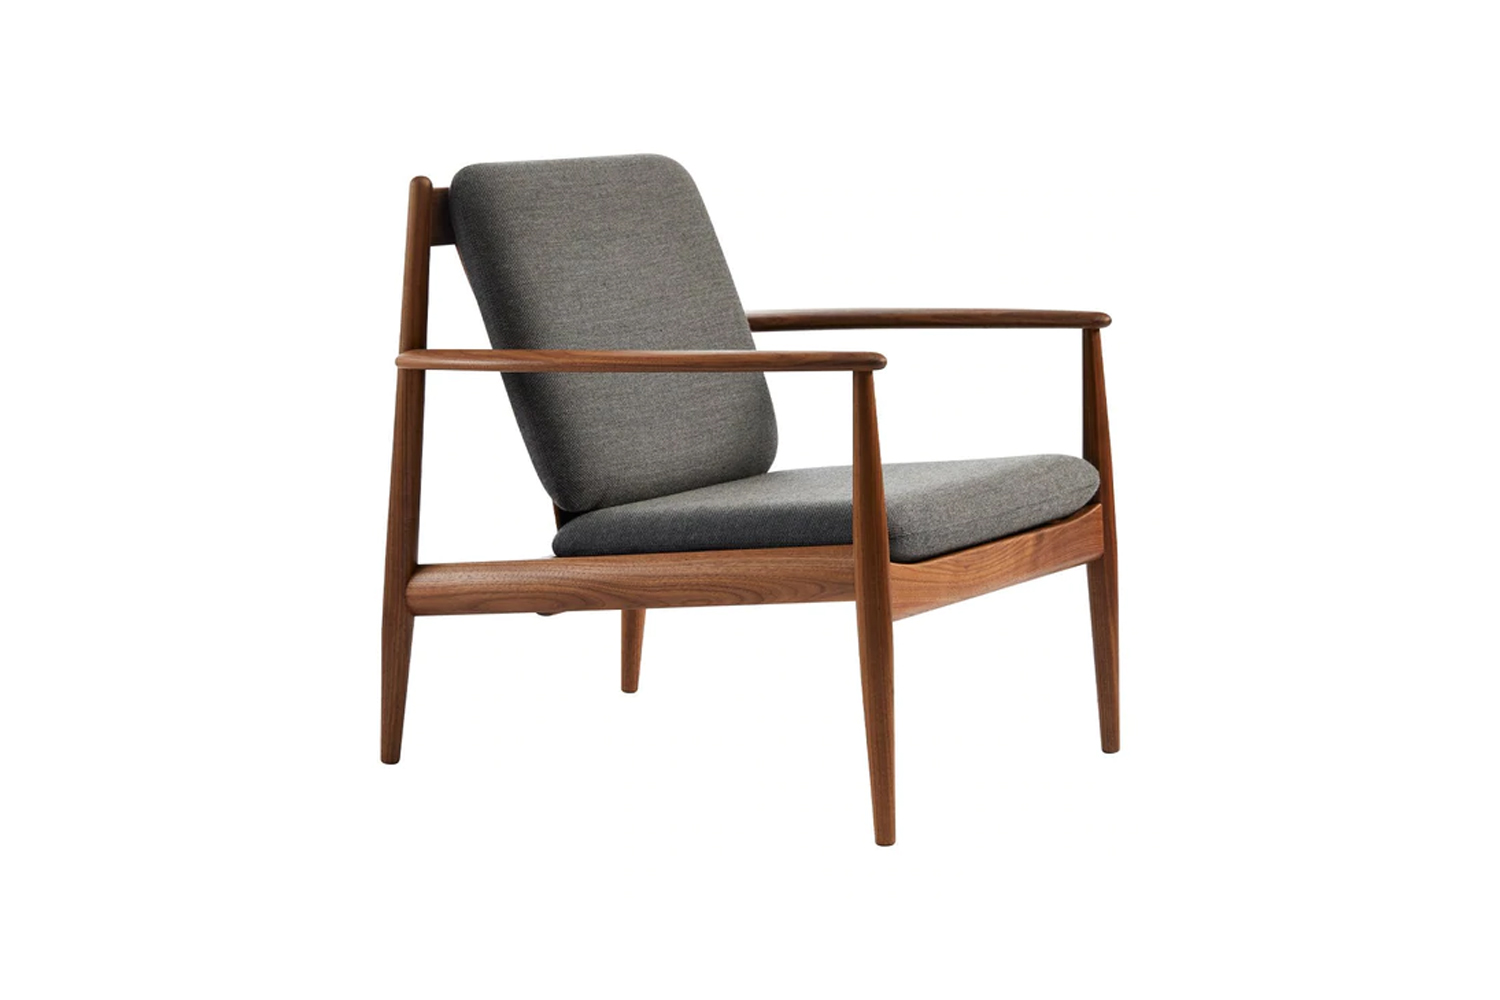 the gj \1\18 easy lounge chair is a similar style to the midcentury armchair se 19